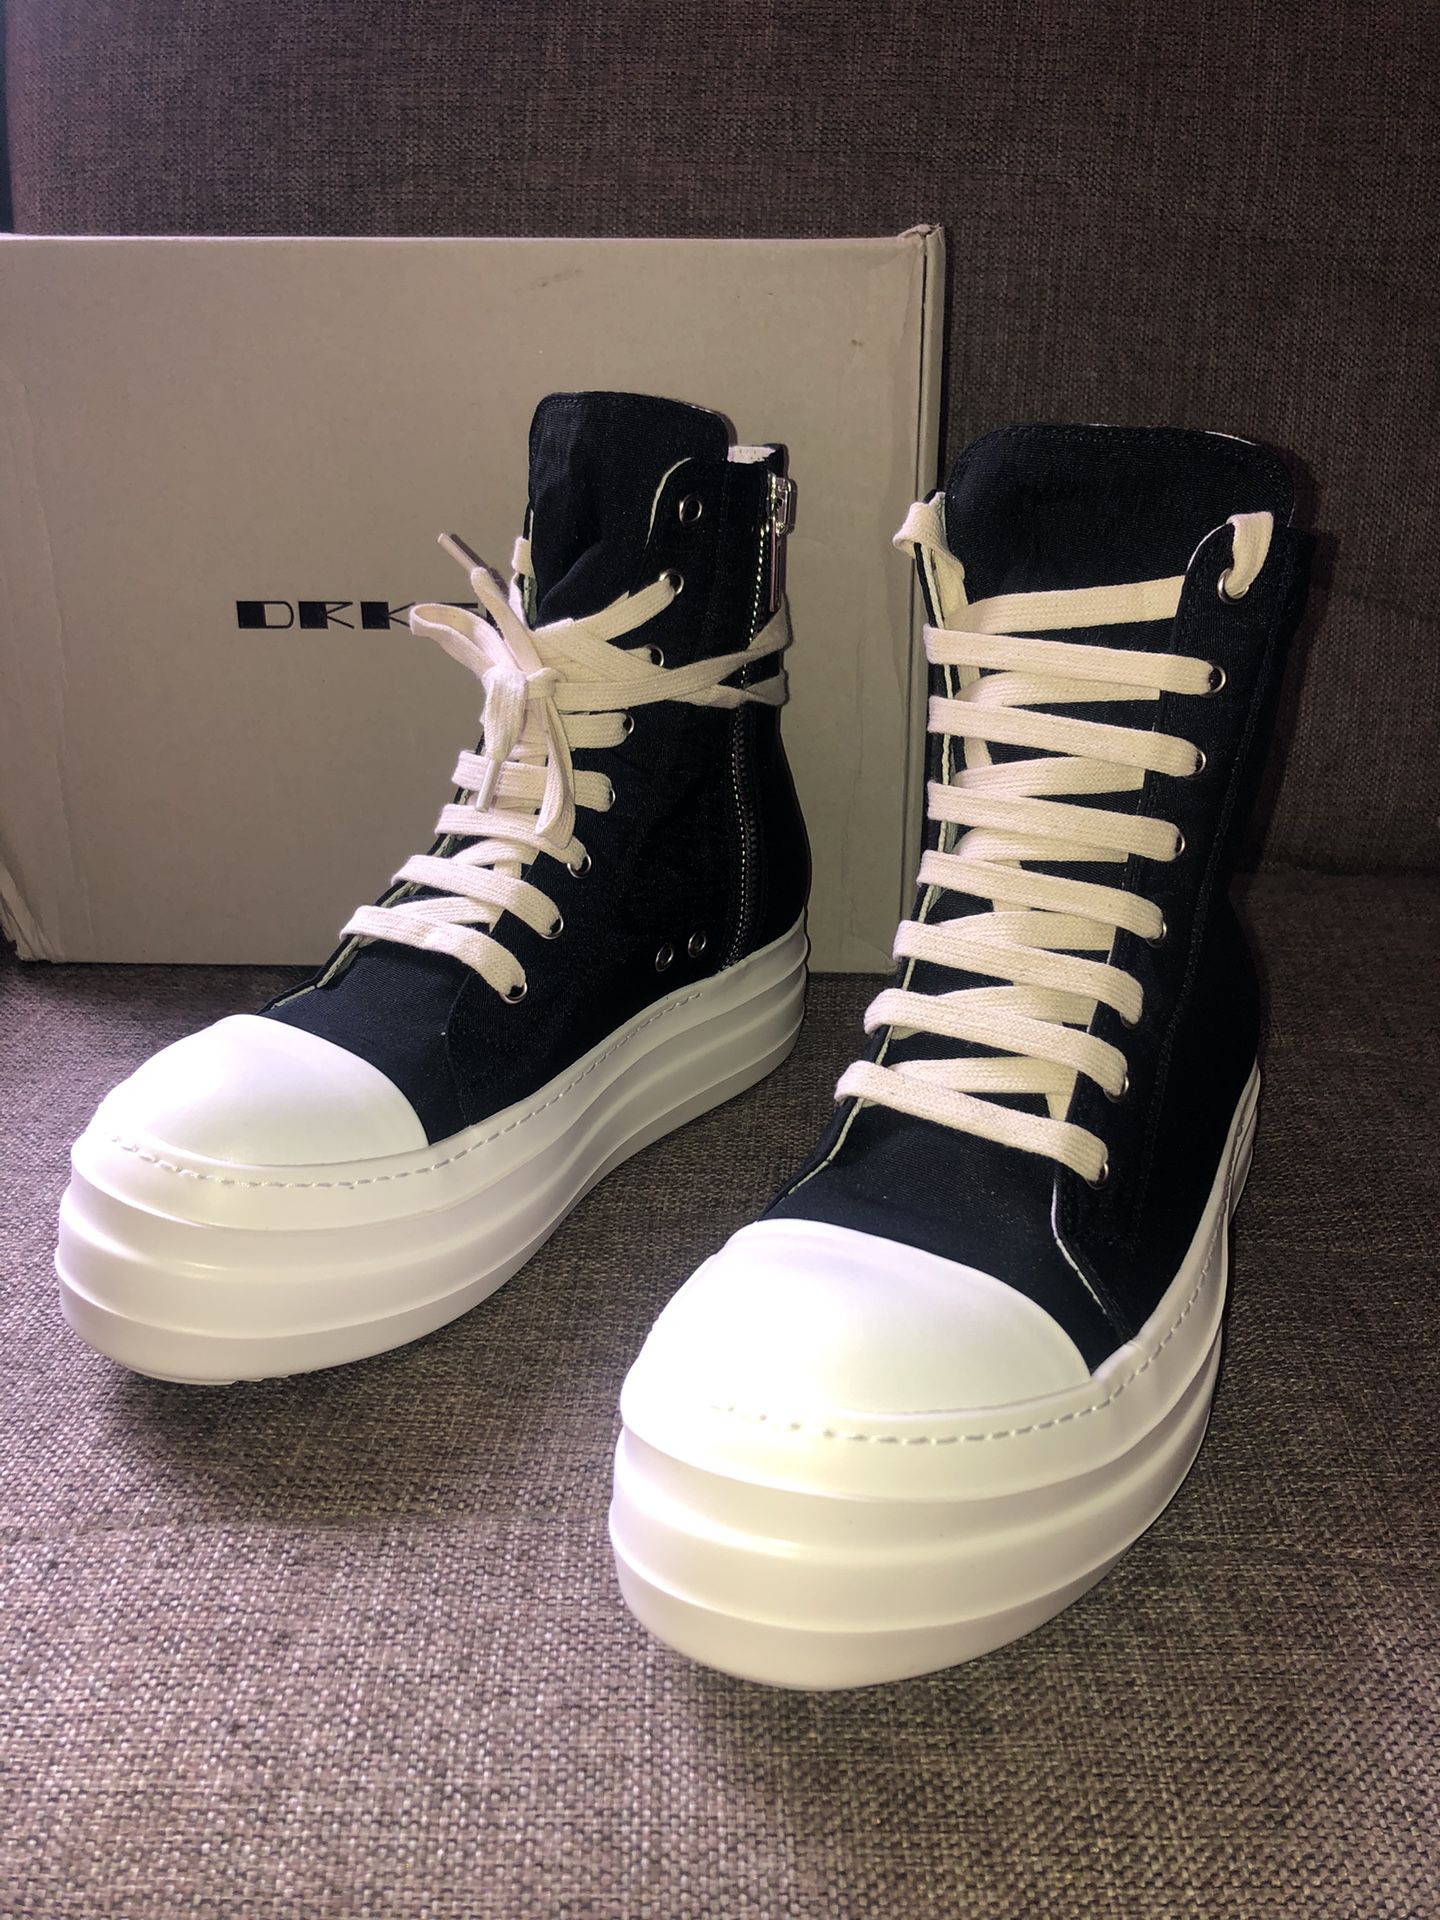 Rick Owens Double Bumper Sneakers for Sale in New York, NY - OfferUp